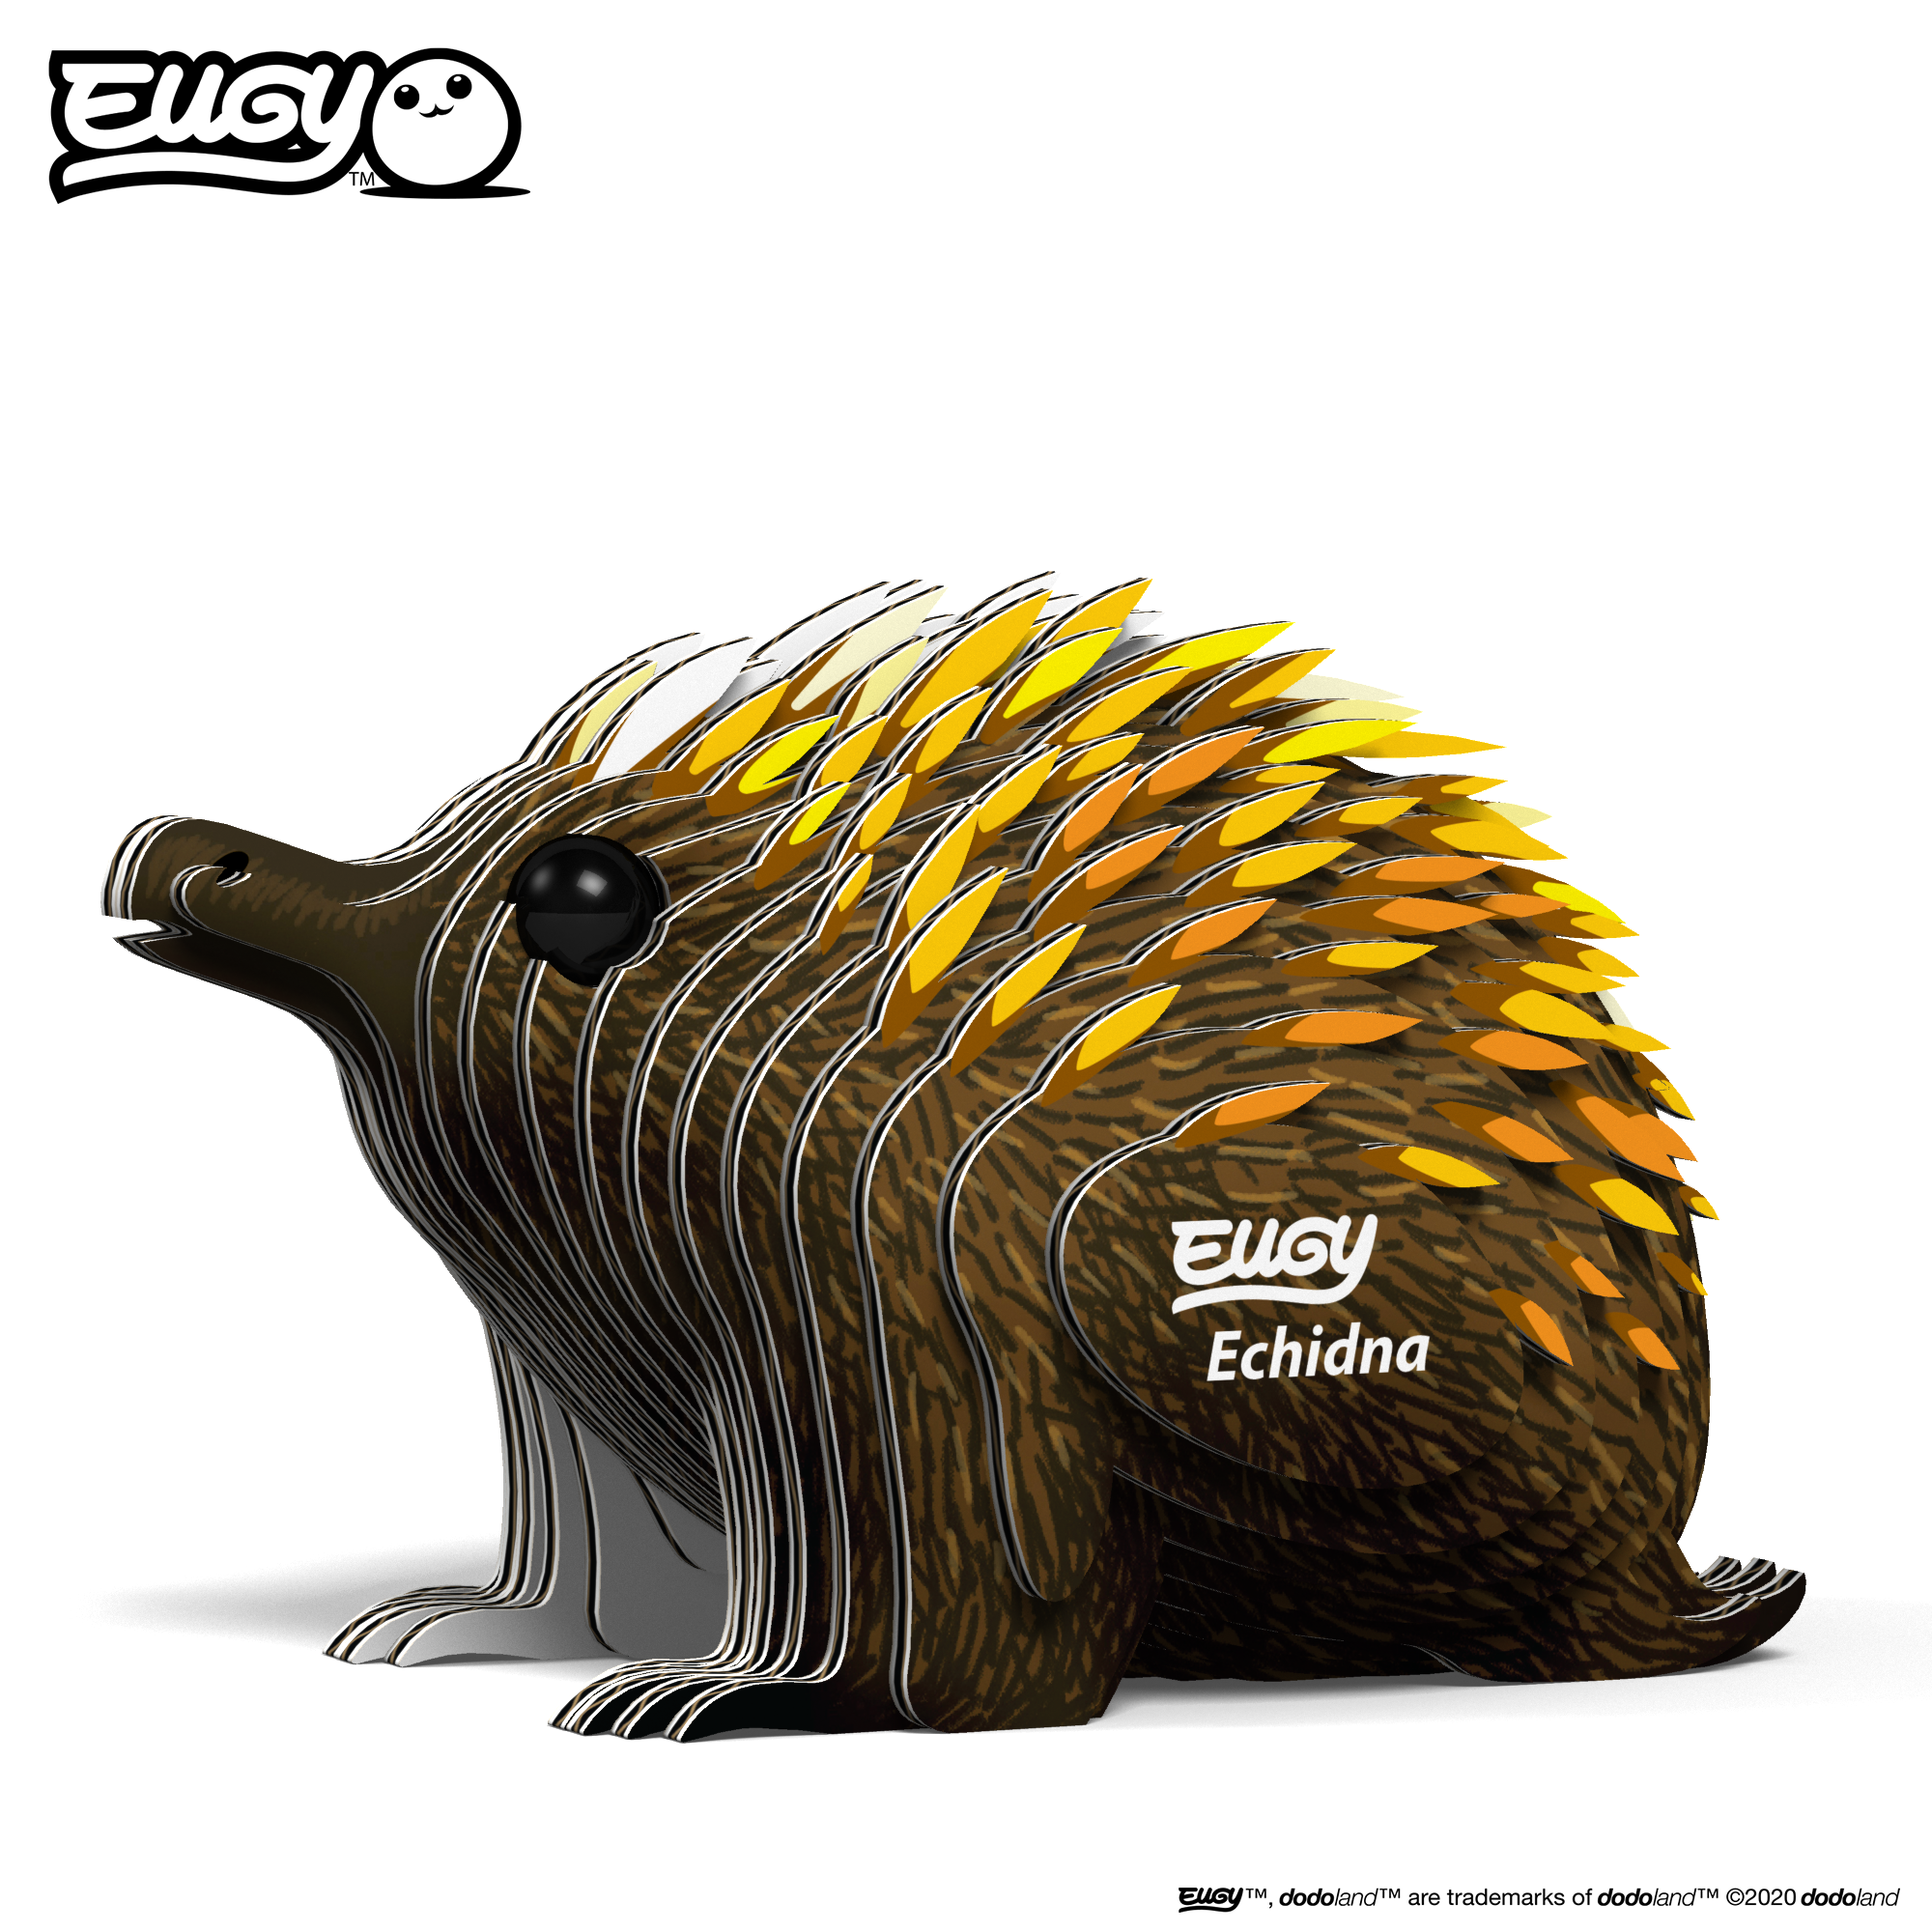 Image of an EUGY Echidna, facing left on an angle against a white background